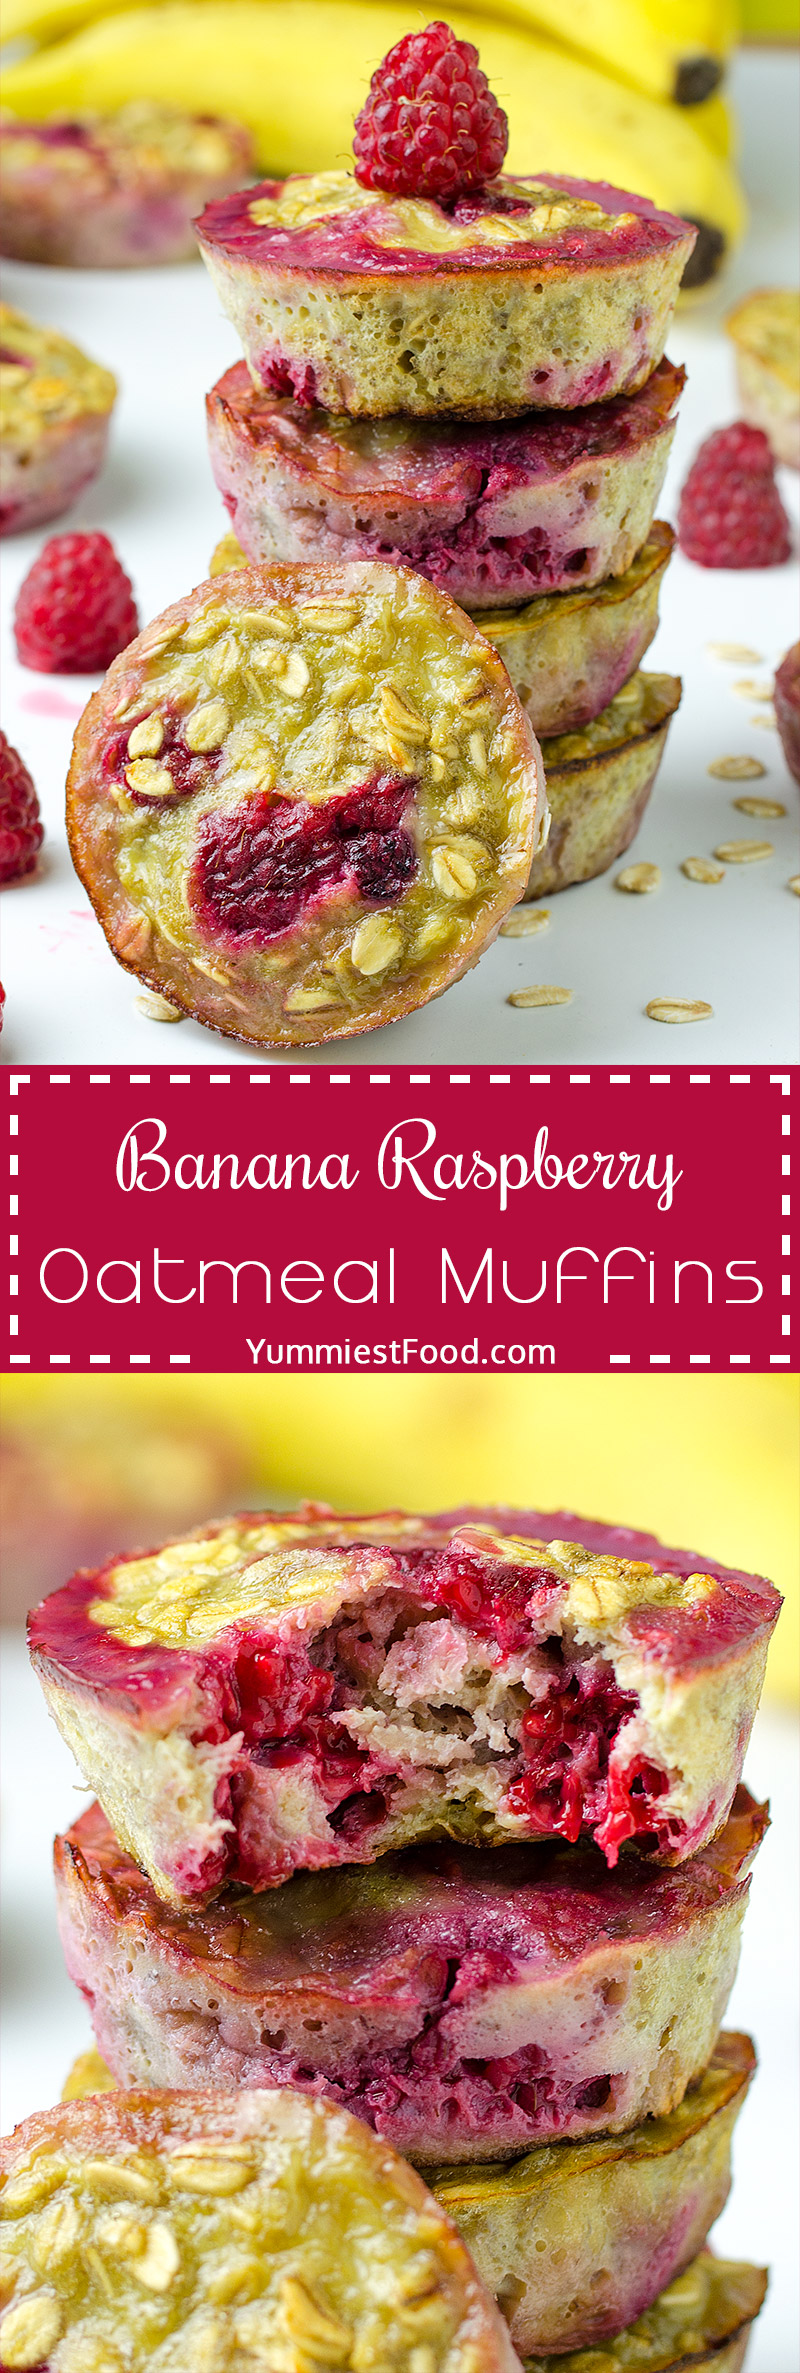 HEALTHY BANANA RASPBERRY OATMEAL MUFFINS - A QUICK, EASY and delicious recipe with FOUR ingredients, NO flour, sugar or butter